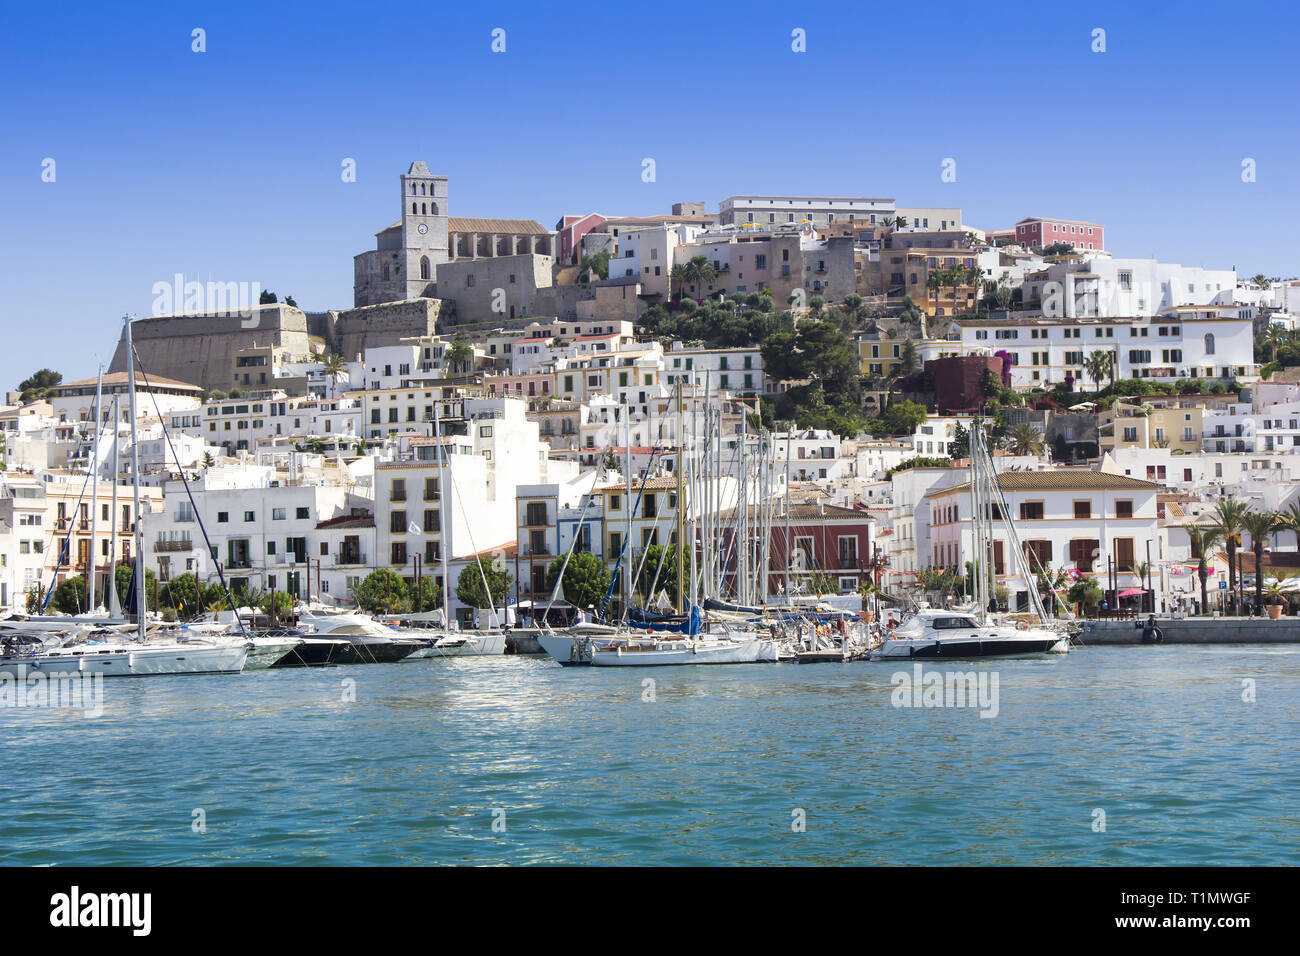 Ibiza town of Eivissa with the cathedral and old town, the Balearic islands Stock Photo